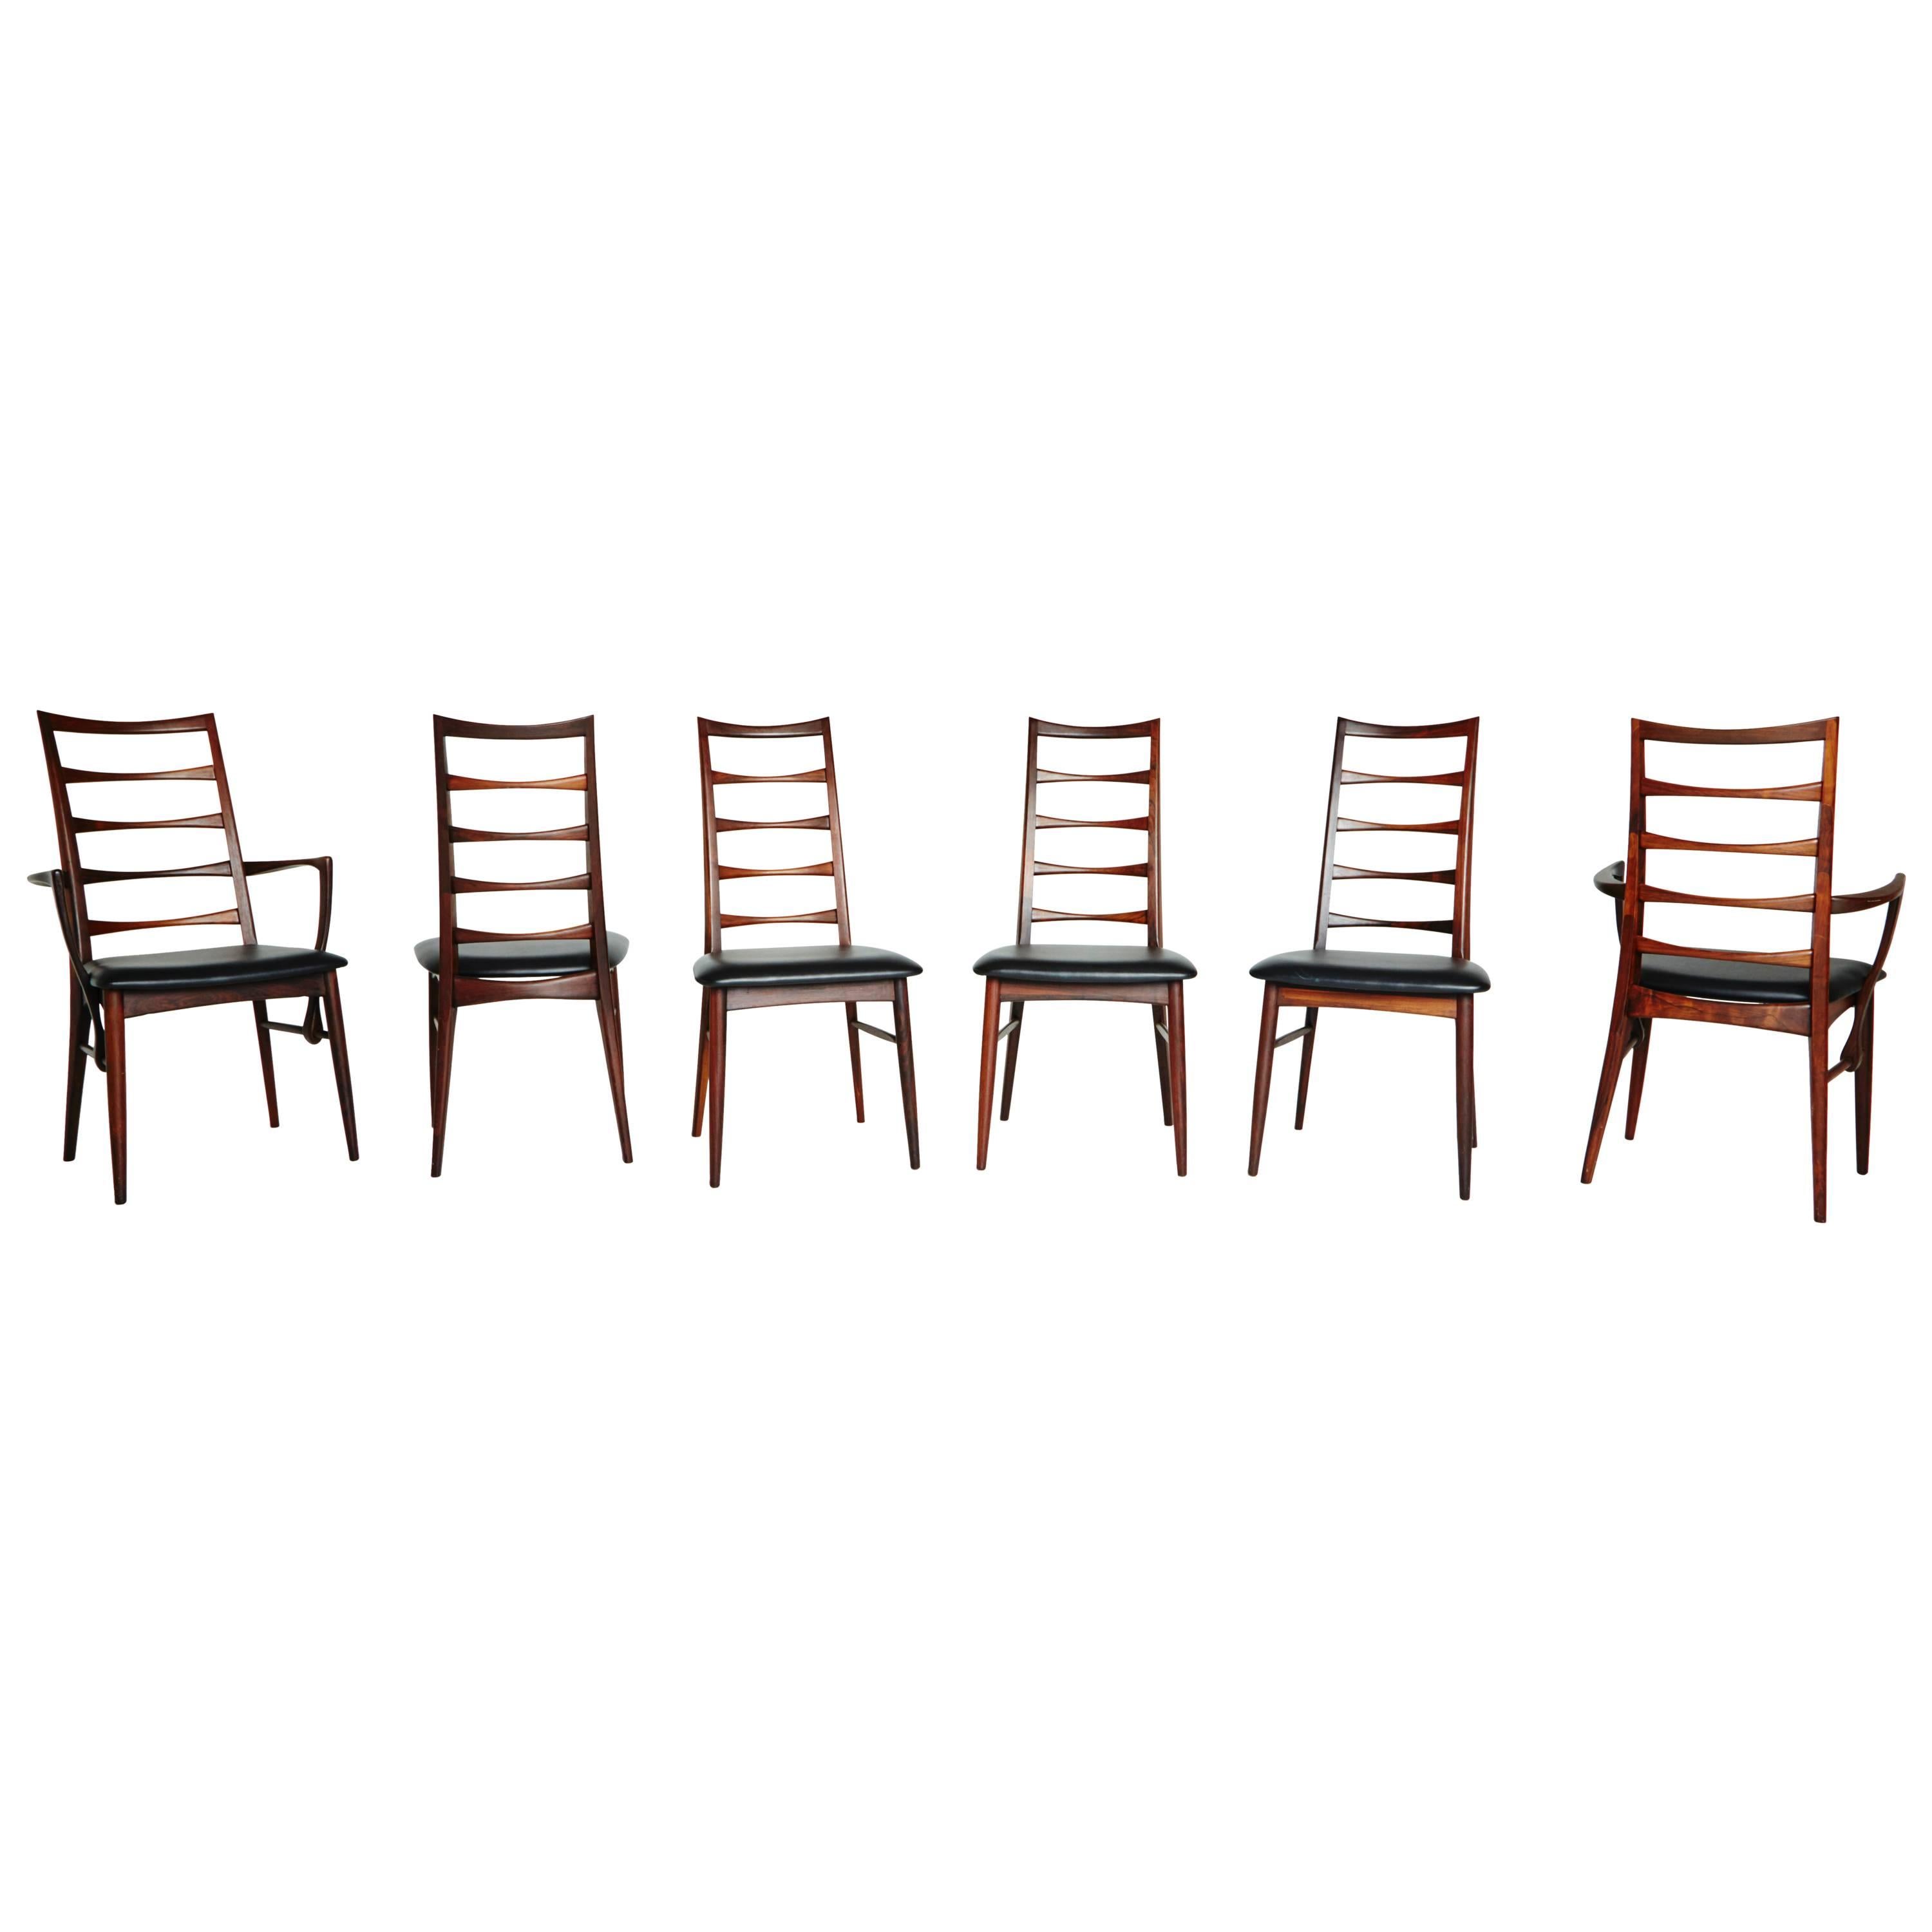 Six "Lis" Dining Chairs by Niels Koefoed for Koefoed Hornsle - ON SALE